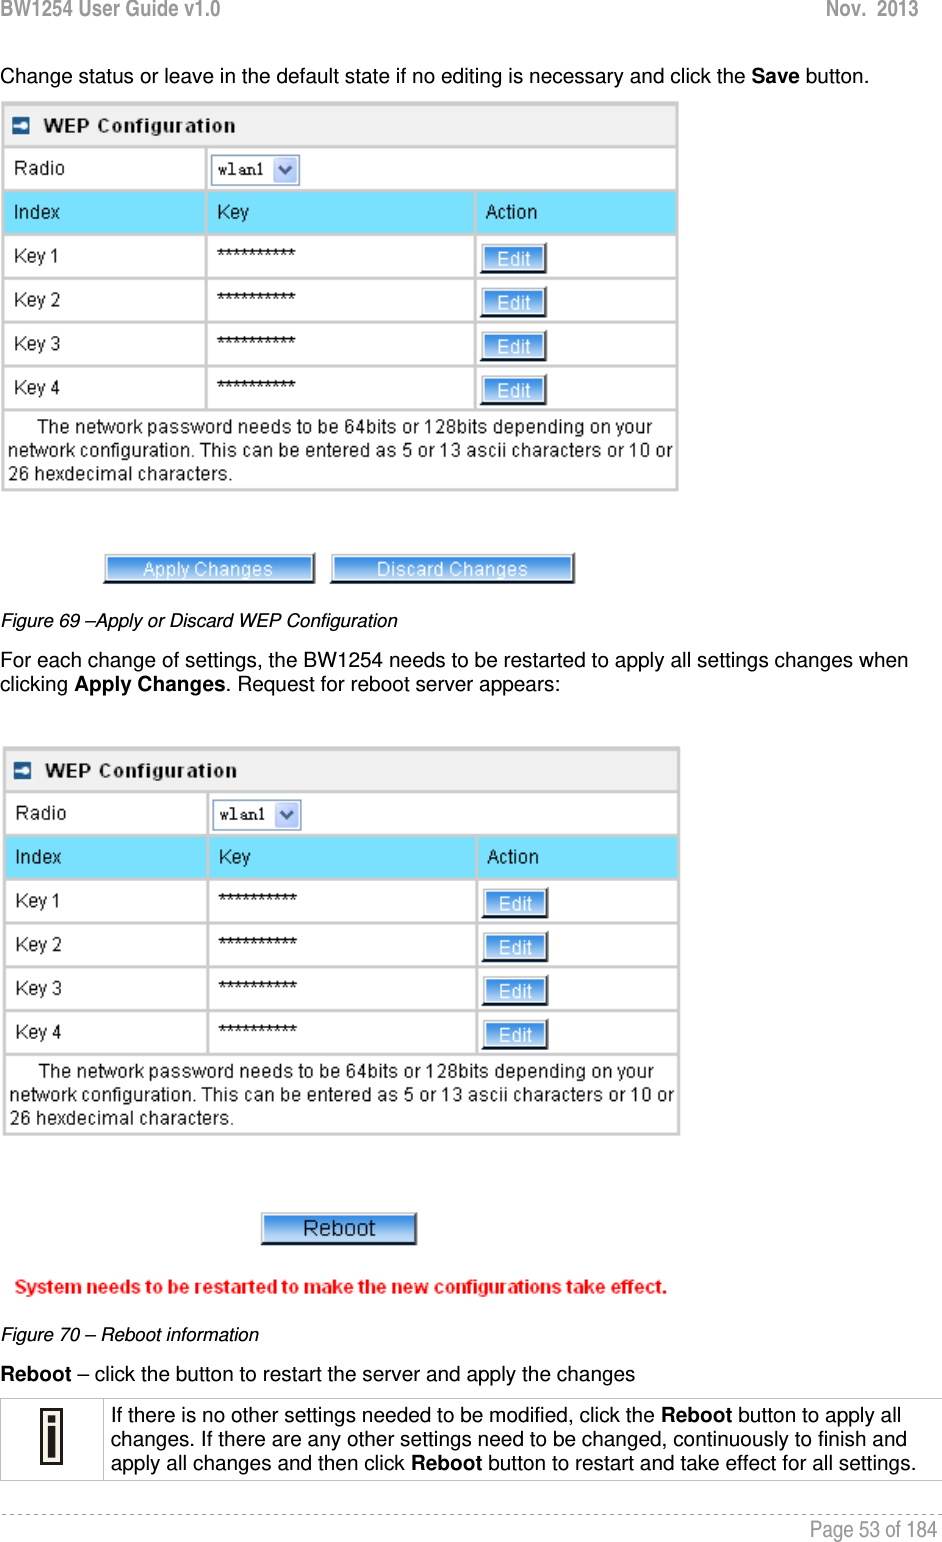 BW1254 User Guide v1.0  Nov.  2013     Page 53 of 184   Change status or leave in the default state if no editing is necessary and click the Save button.   Figure 69 –Apply or Discard WEP Configuration For each change of settings, the BW1254 needs to be restarted to apply all settings changes when clicking Apply Changes. Request for reboot server appears:   Figure 70 – Reboot information Reboot – click the button to restart the server and apply the changes  If there is no other settings needed to be modified, click the Reboot button to apply all changes. If there are any other settings need to be changed, continuously to finish and apply all changes and then click Reboot button to restart and take effect for all settings.  